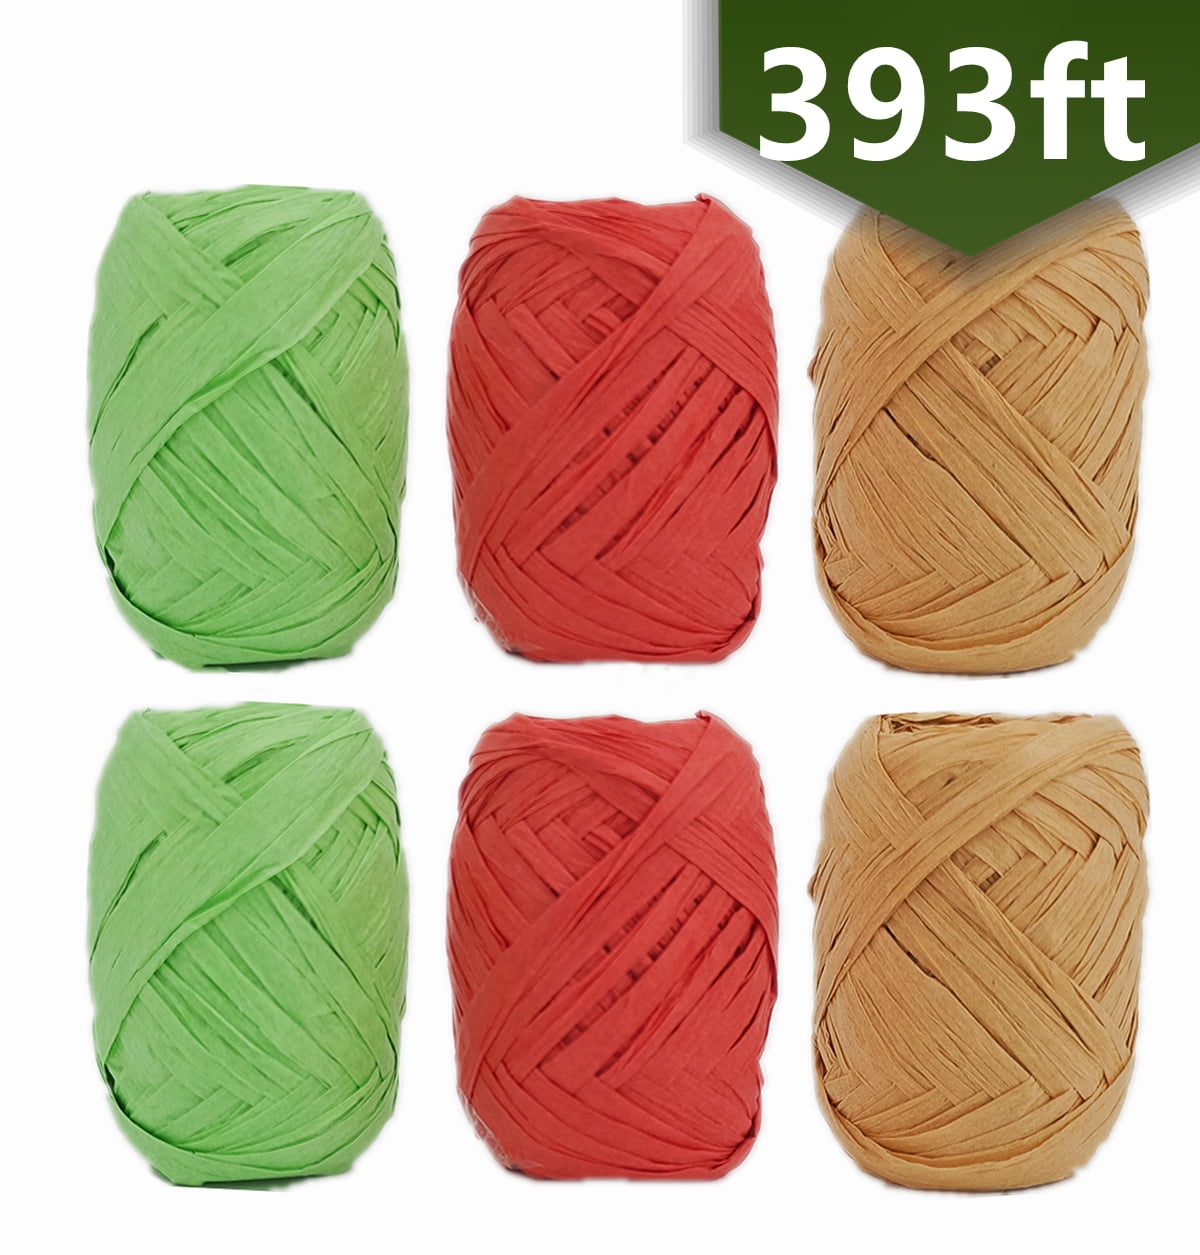  TEHAUX 2 Rolls Strings Color Raffia Present Wrapping Ribbon  Curling Ribbon for Gift Wrapping Raffia Paper Ribbons Christmas Gifts Gift  Ribbon for Gift Wrapping Multicolor Twine : Everything Else